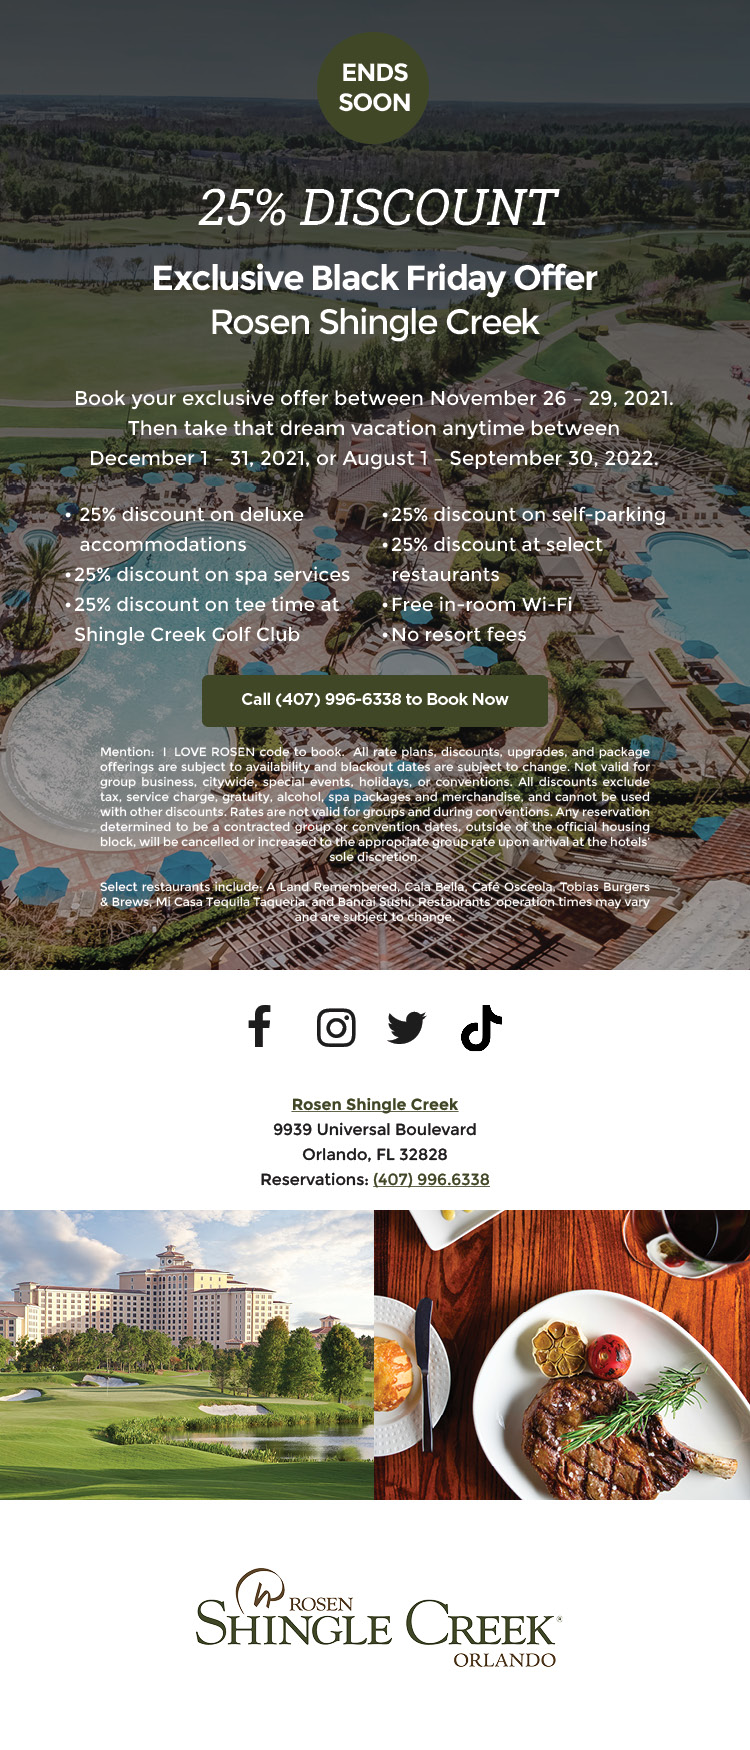 25% Discount Deal
		  
Your Exclusive Black Friday Offer
		  
from Rosen Shingle Creek
		  
Book your exclusive offer between Nov. 26 – 29, 2021.
Then take that dream vacation anytime between
Dec. 1 – 31, 2021, or Aug. 1 – Sept. 30, 2022.
		  
25% discount on deluxe accommodations
25% discount on spa services
25% discount on tee time at Shingle Creek Golf
25% discount on self-parking
25% discount at select restaurants
Free Wi-Fi
No resort fees
		  
All rate plans, discounts, upgrades, and package offerings are subject to availability and blackout dates are subject to change. Not valid for group business, citywide, special events, holidays, or conventions. All discounts exclude tax, service charge, gratuity, alcohol, spa packages and merchandise, and cannot be use with other discounts. Rates are not valid for groups and during conventions. Any reservation determined to be a contracted group or convention dates, outside of the official housing block, will be cancelled or increased to the appropriate group rate upon arrival at the hotels’ sole discretion.

Select restaurants include: A Land Remembered, Cala Bella, Café Osceola, Tobias Burgers & Brews, Mi Casa Tequila Taqueria, and Banrai Sushi. Restaurants’ operation times may vary and are subject to change.
		  
Rosen Shingle Creek
9939 Universal Boulevard
Orlando, FL 32828
Reservations: (407) 996.6338